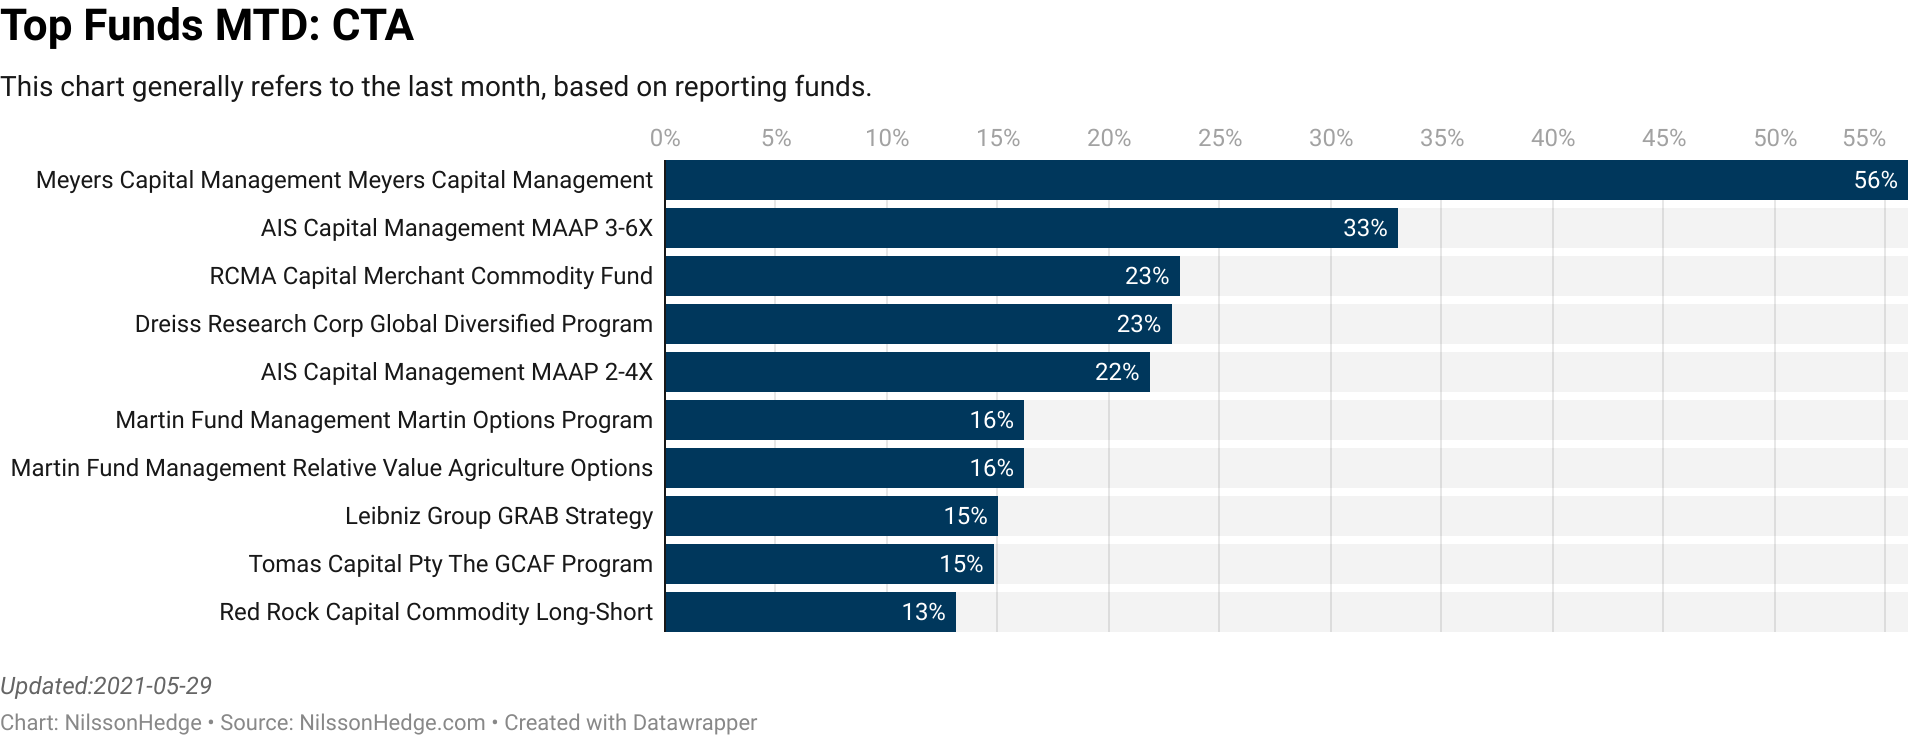 Who were the best CTA Hedge Funds in April?